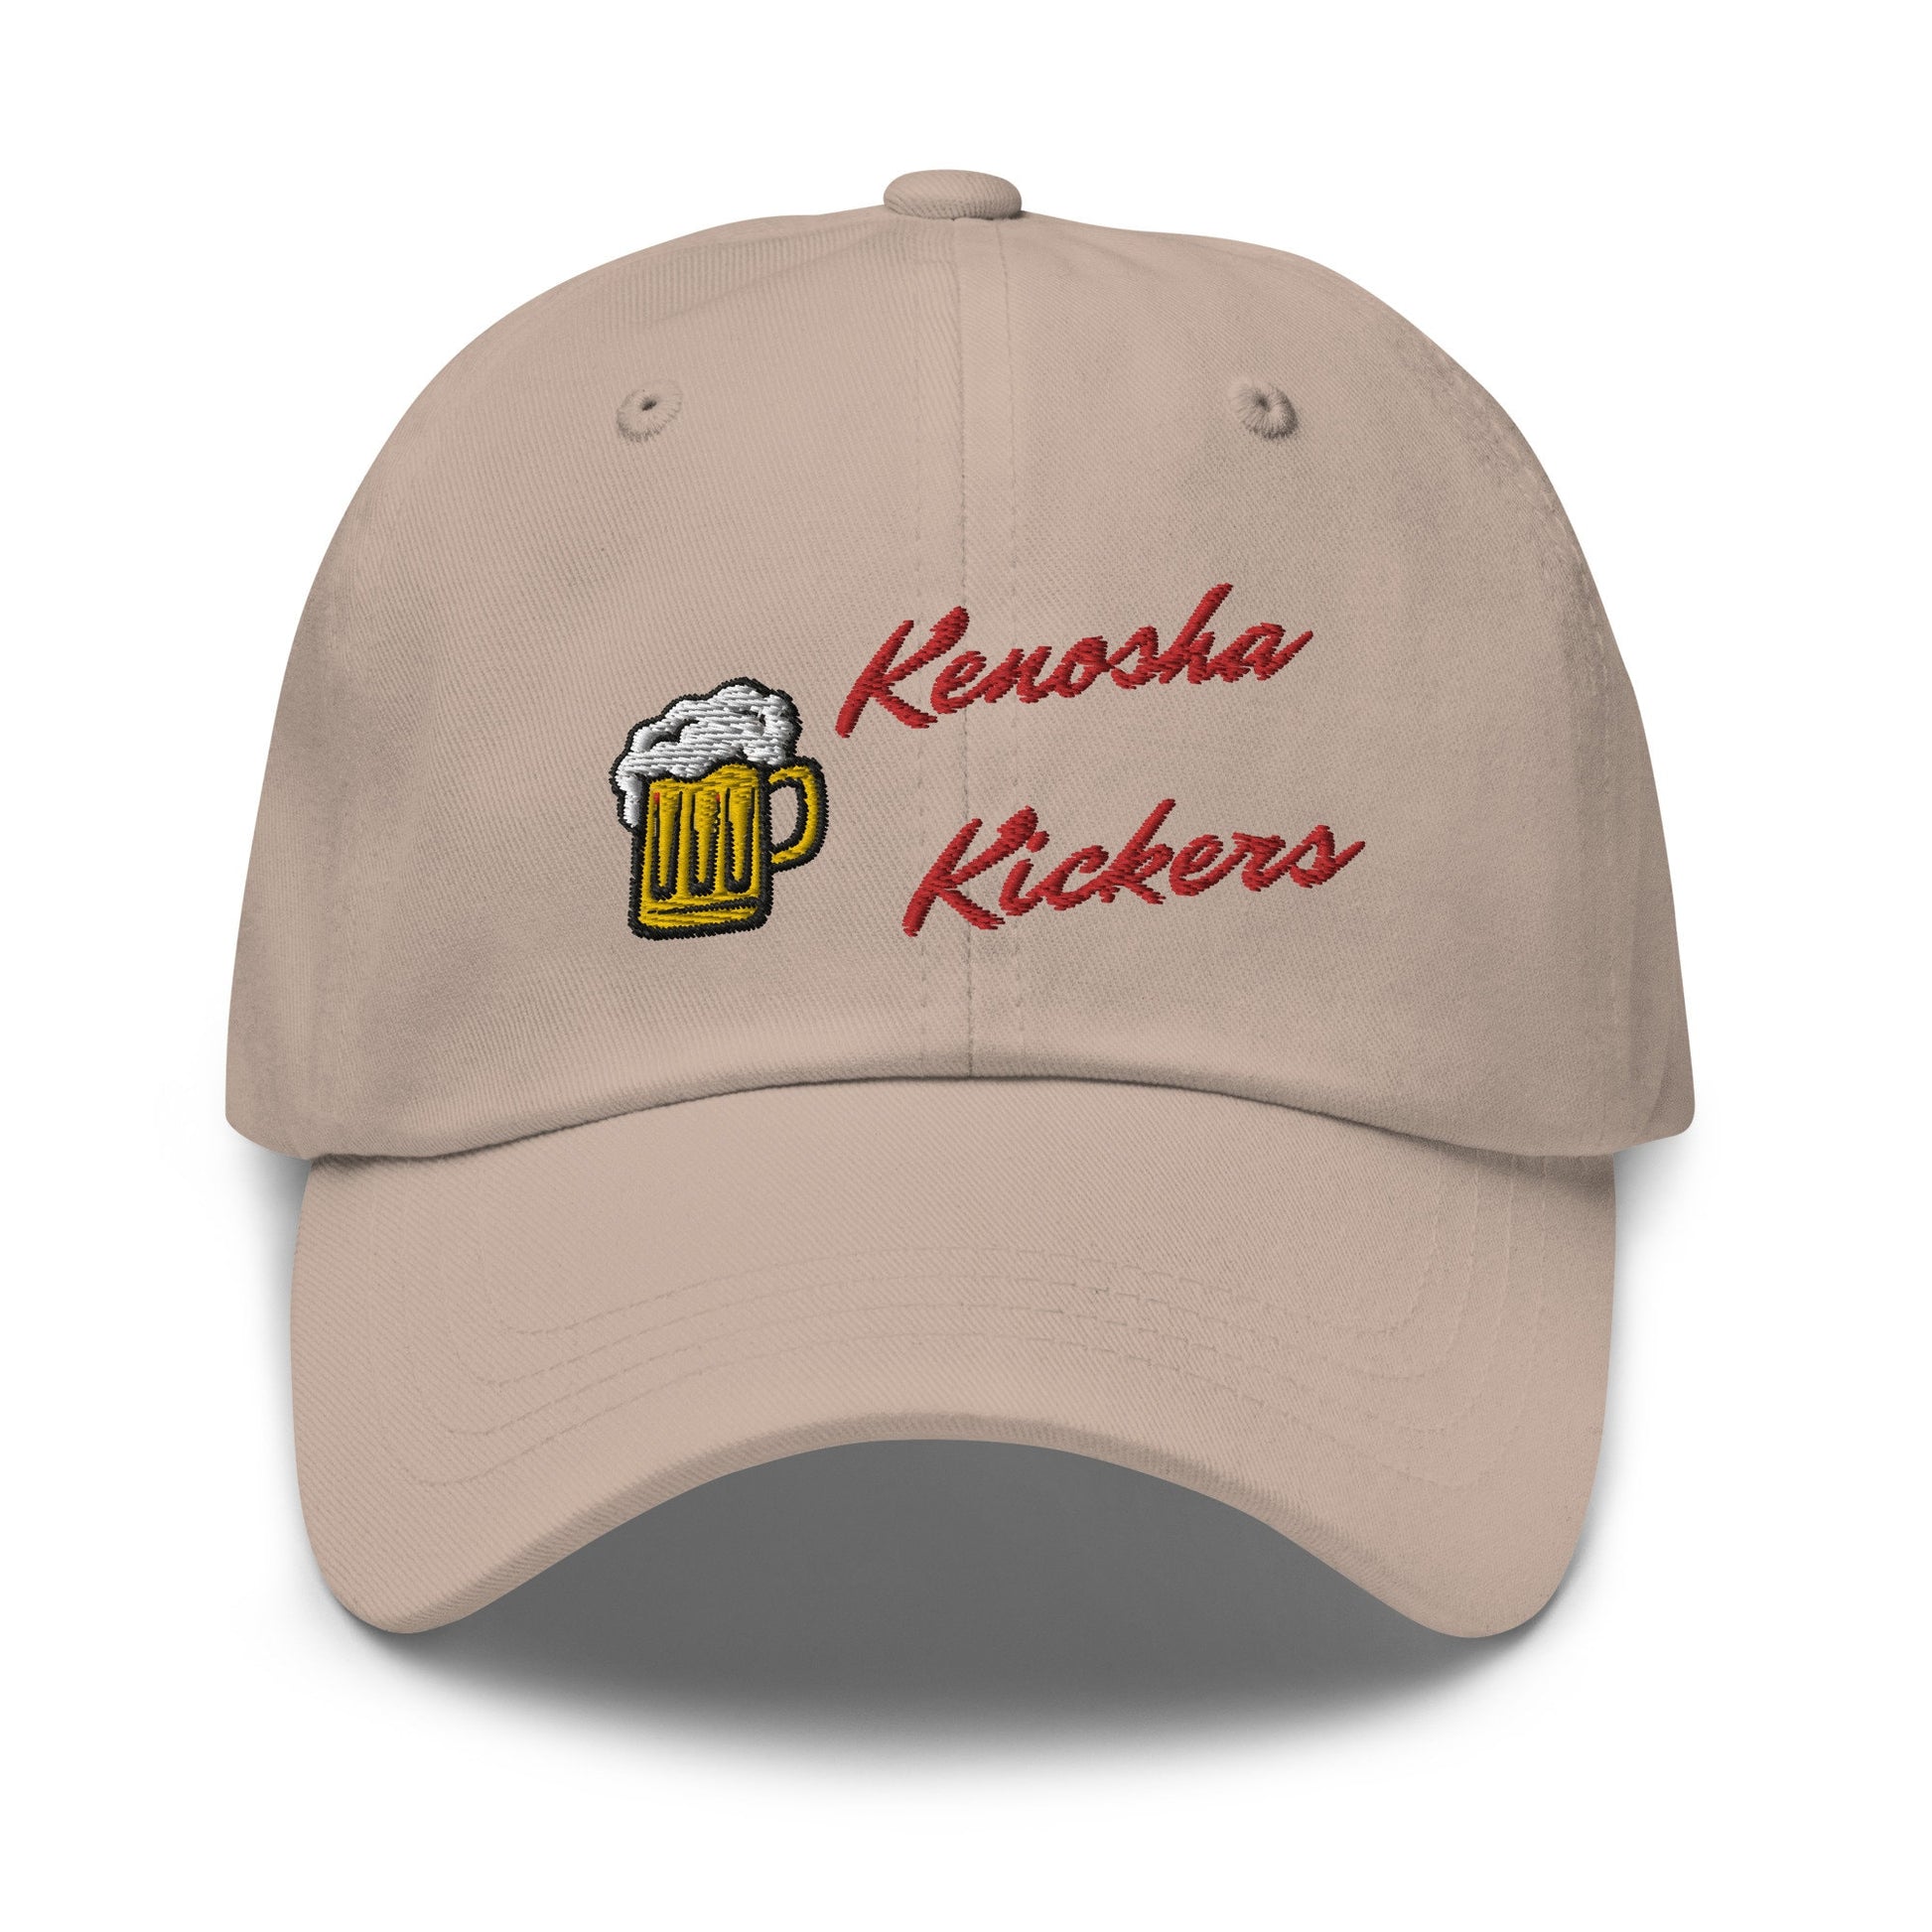 Kenosha Kickers Hat - Funny Christmas Gift - Secret Santa - Ugly Christmas Sweater Party - Multiple Colors - Cotton Embroidered Cap